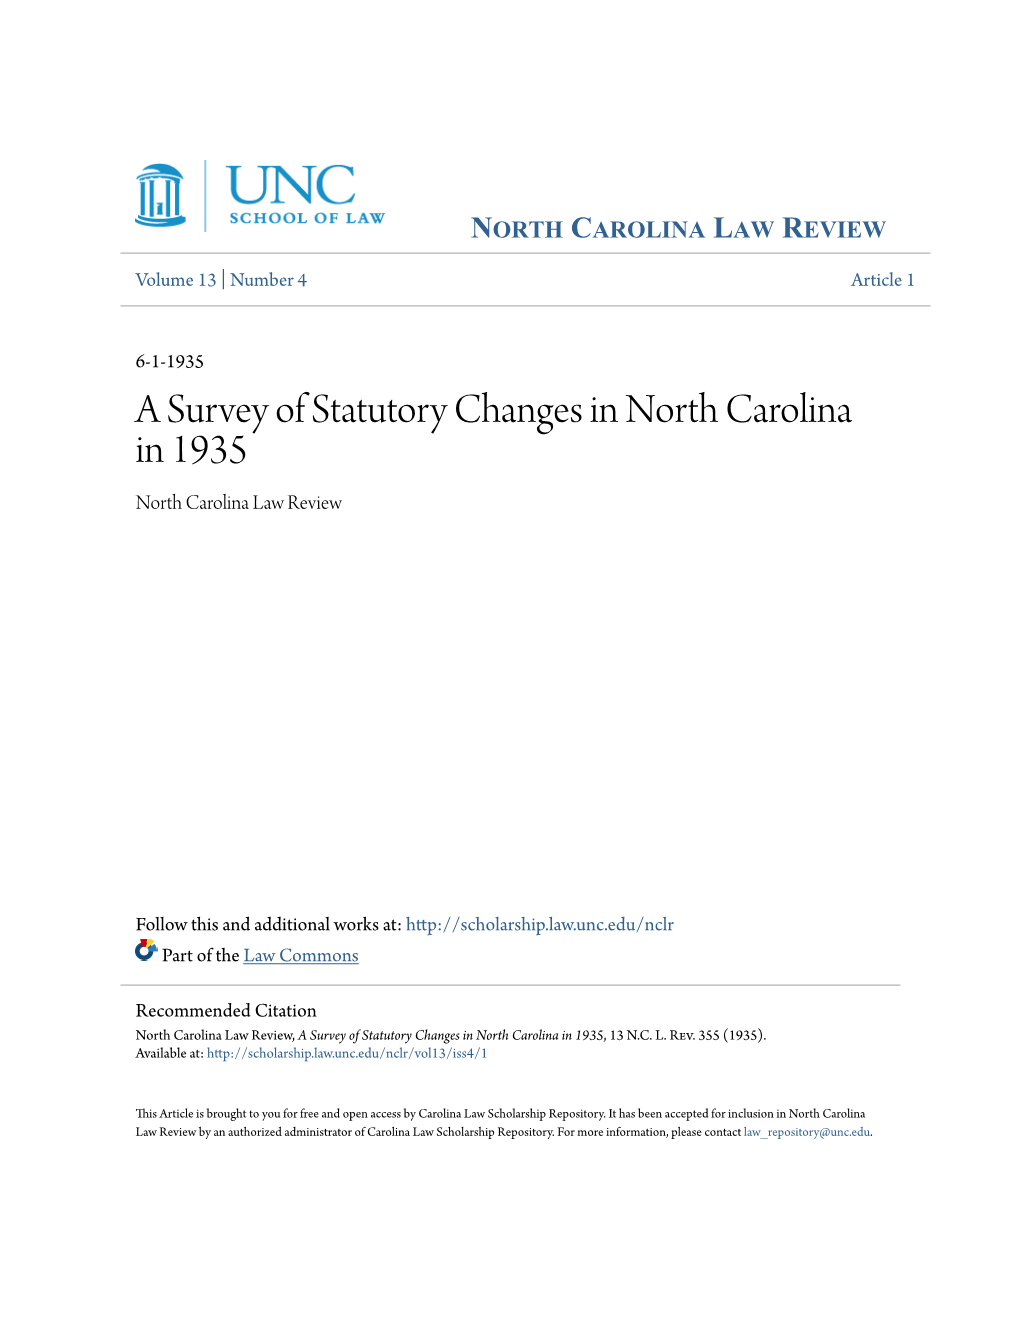 A Survey of Statutory Changes in North Carolina in 1935 North Carolina Law Review